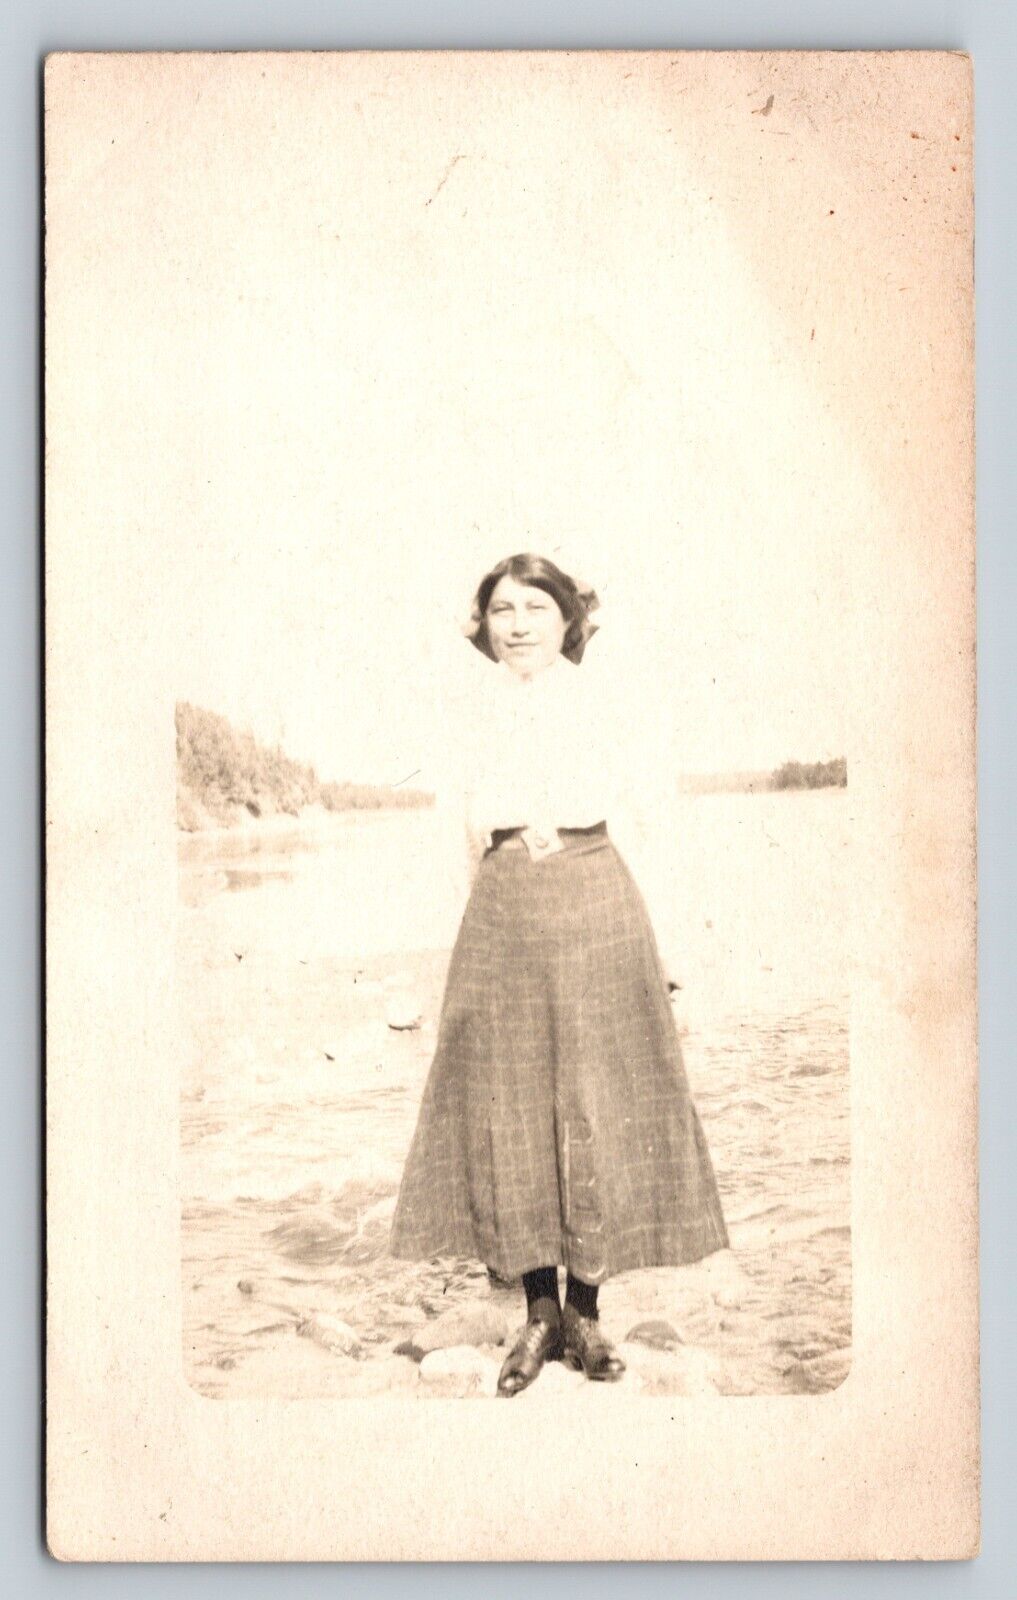 c1913 RPPC Lady in Blouse & Skirt On Rocky Beach ANTIQUE Postcard 1325